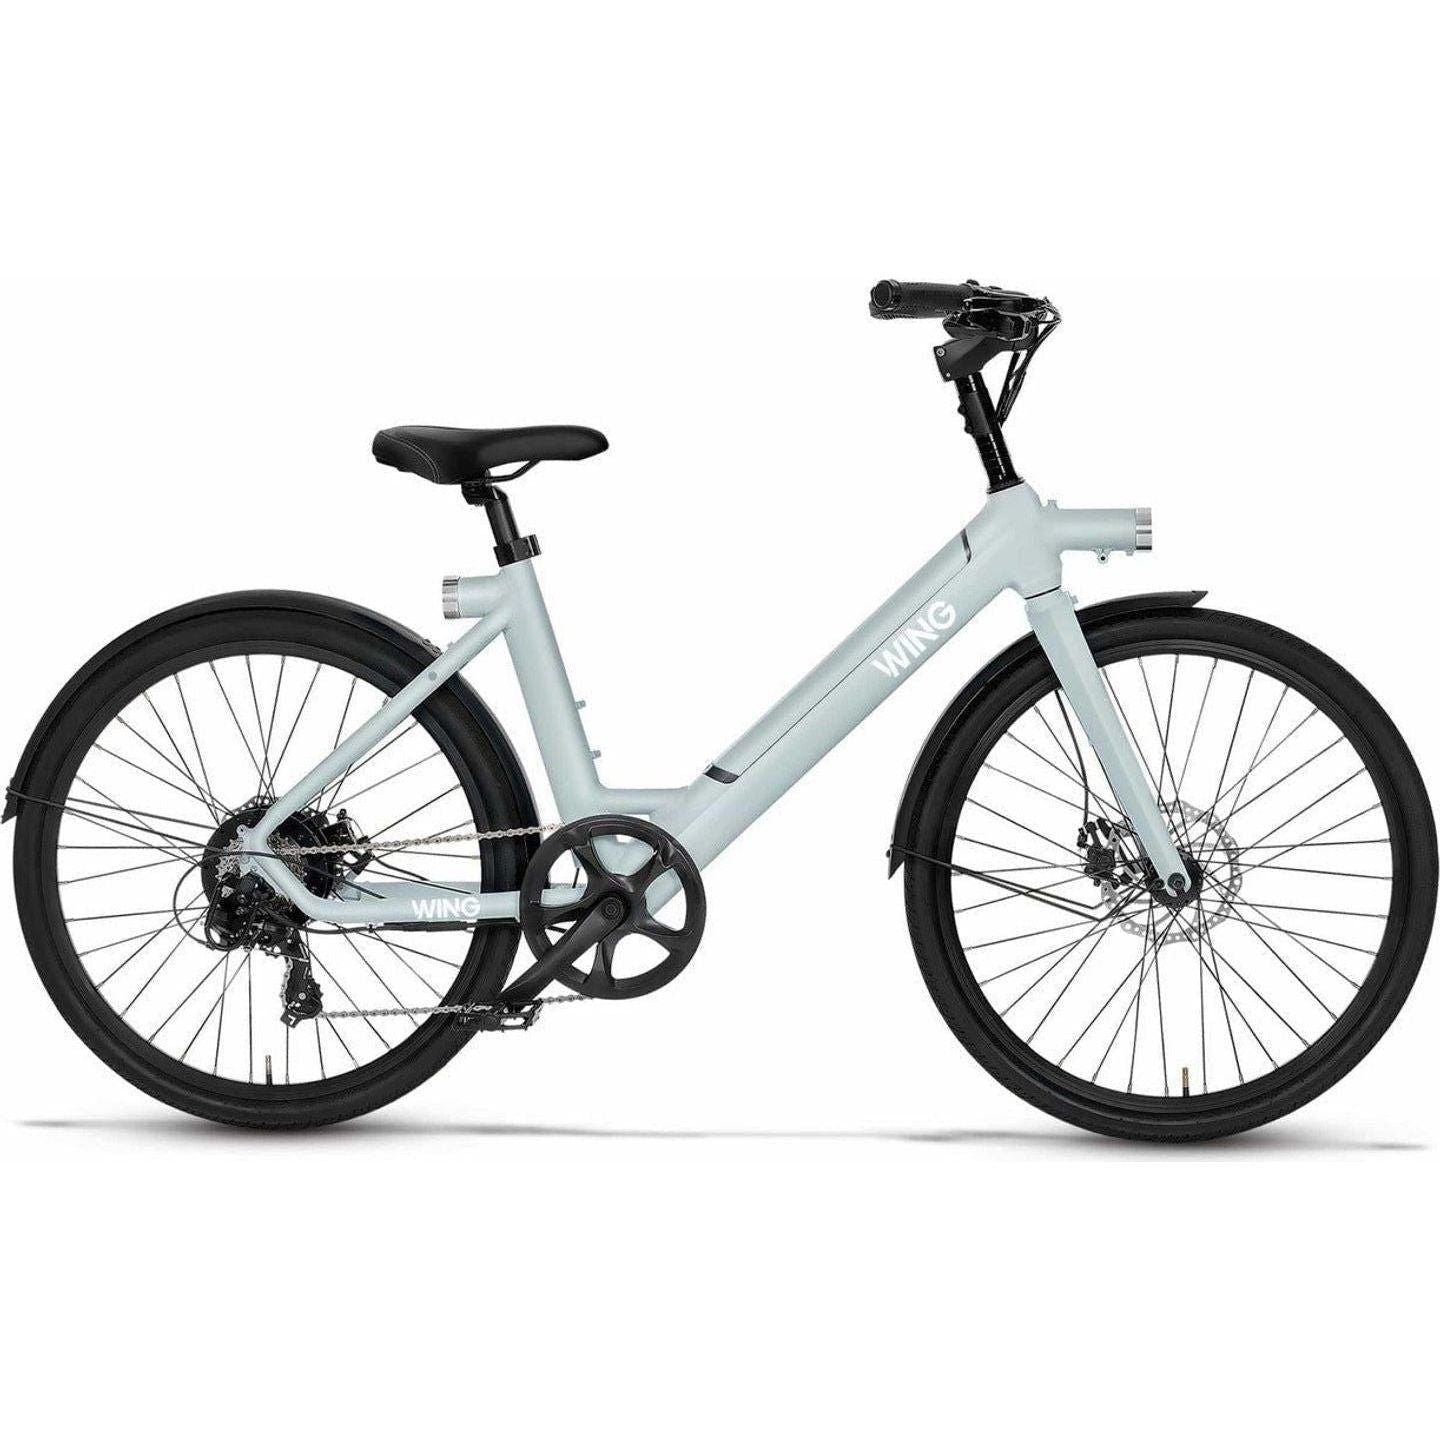 Wing Bikes Bicycles 14ah (Up to 60 miles) / Blue Wing Freedom ST